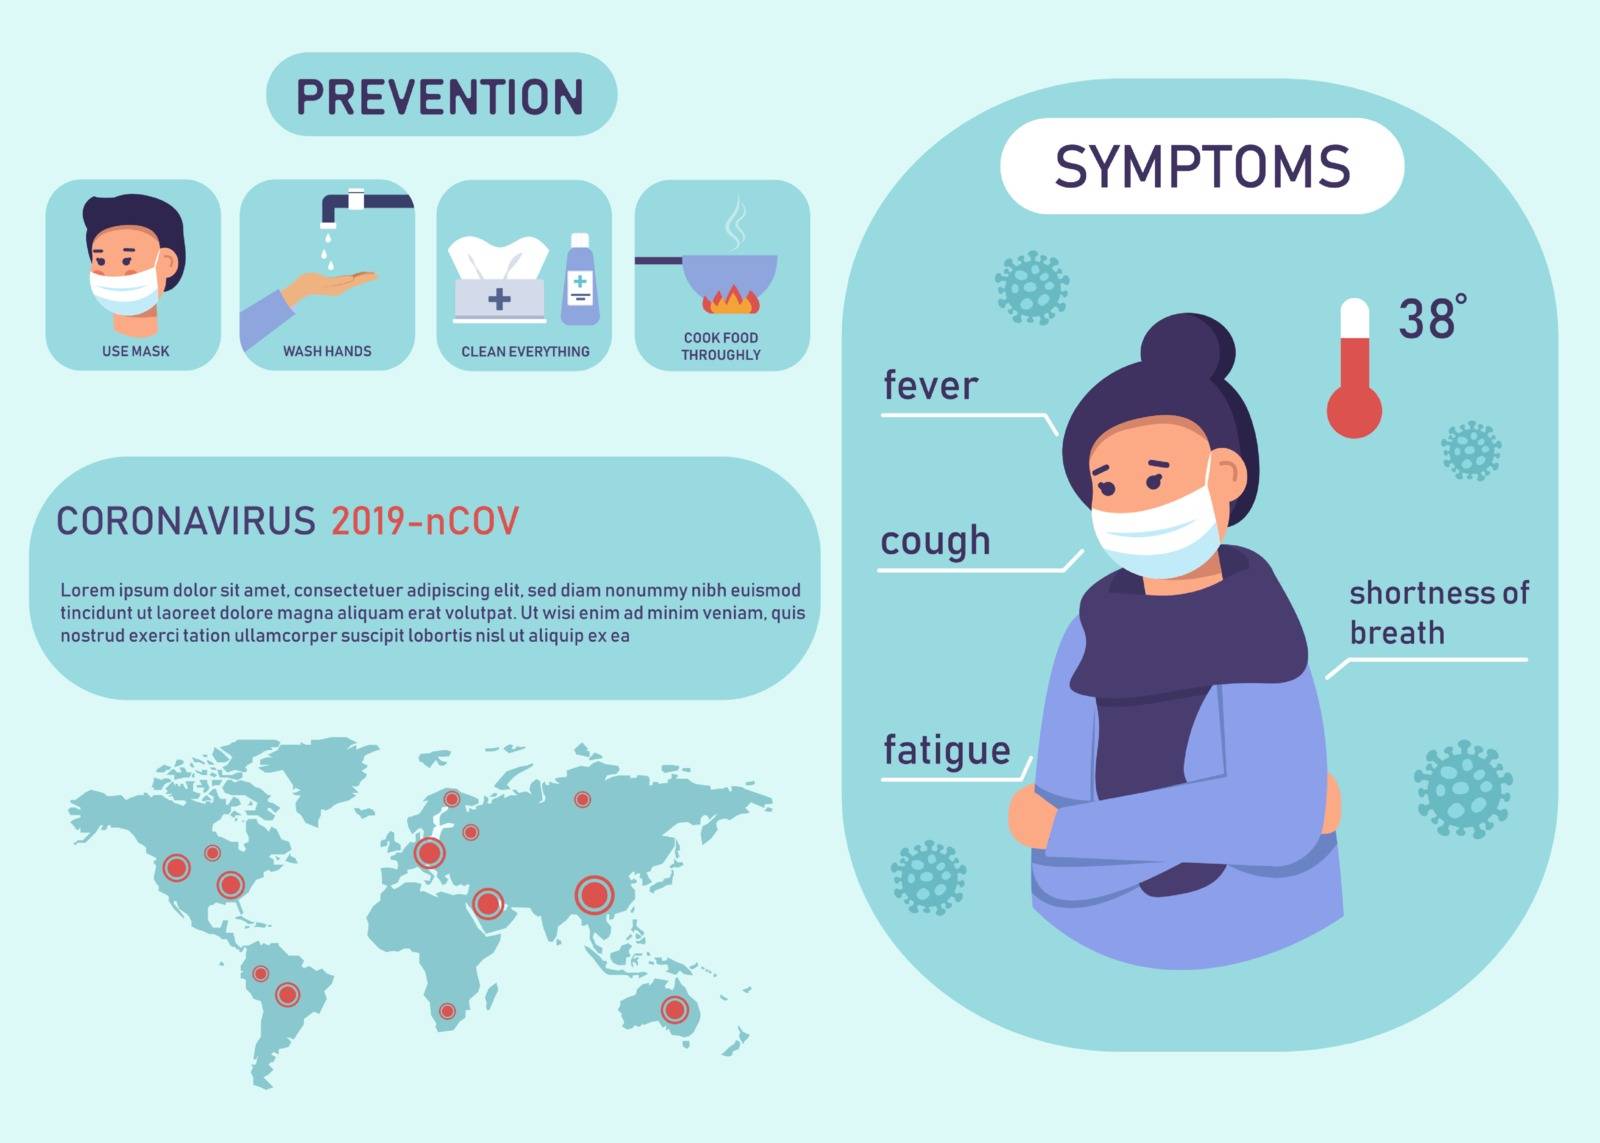 Corona virus 2019 symptoms and prevention infographic. 2019-nCOV cases around the world. Vector Illustration by Helenshi